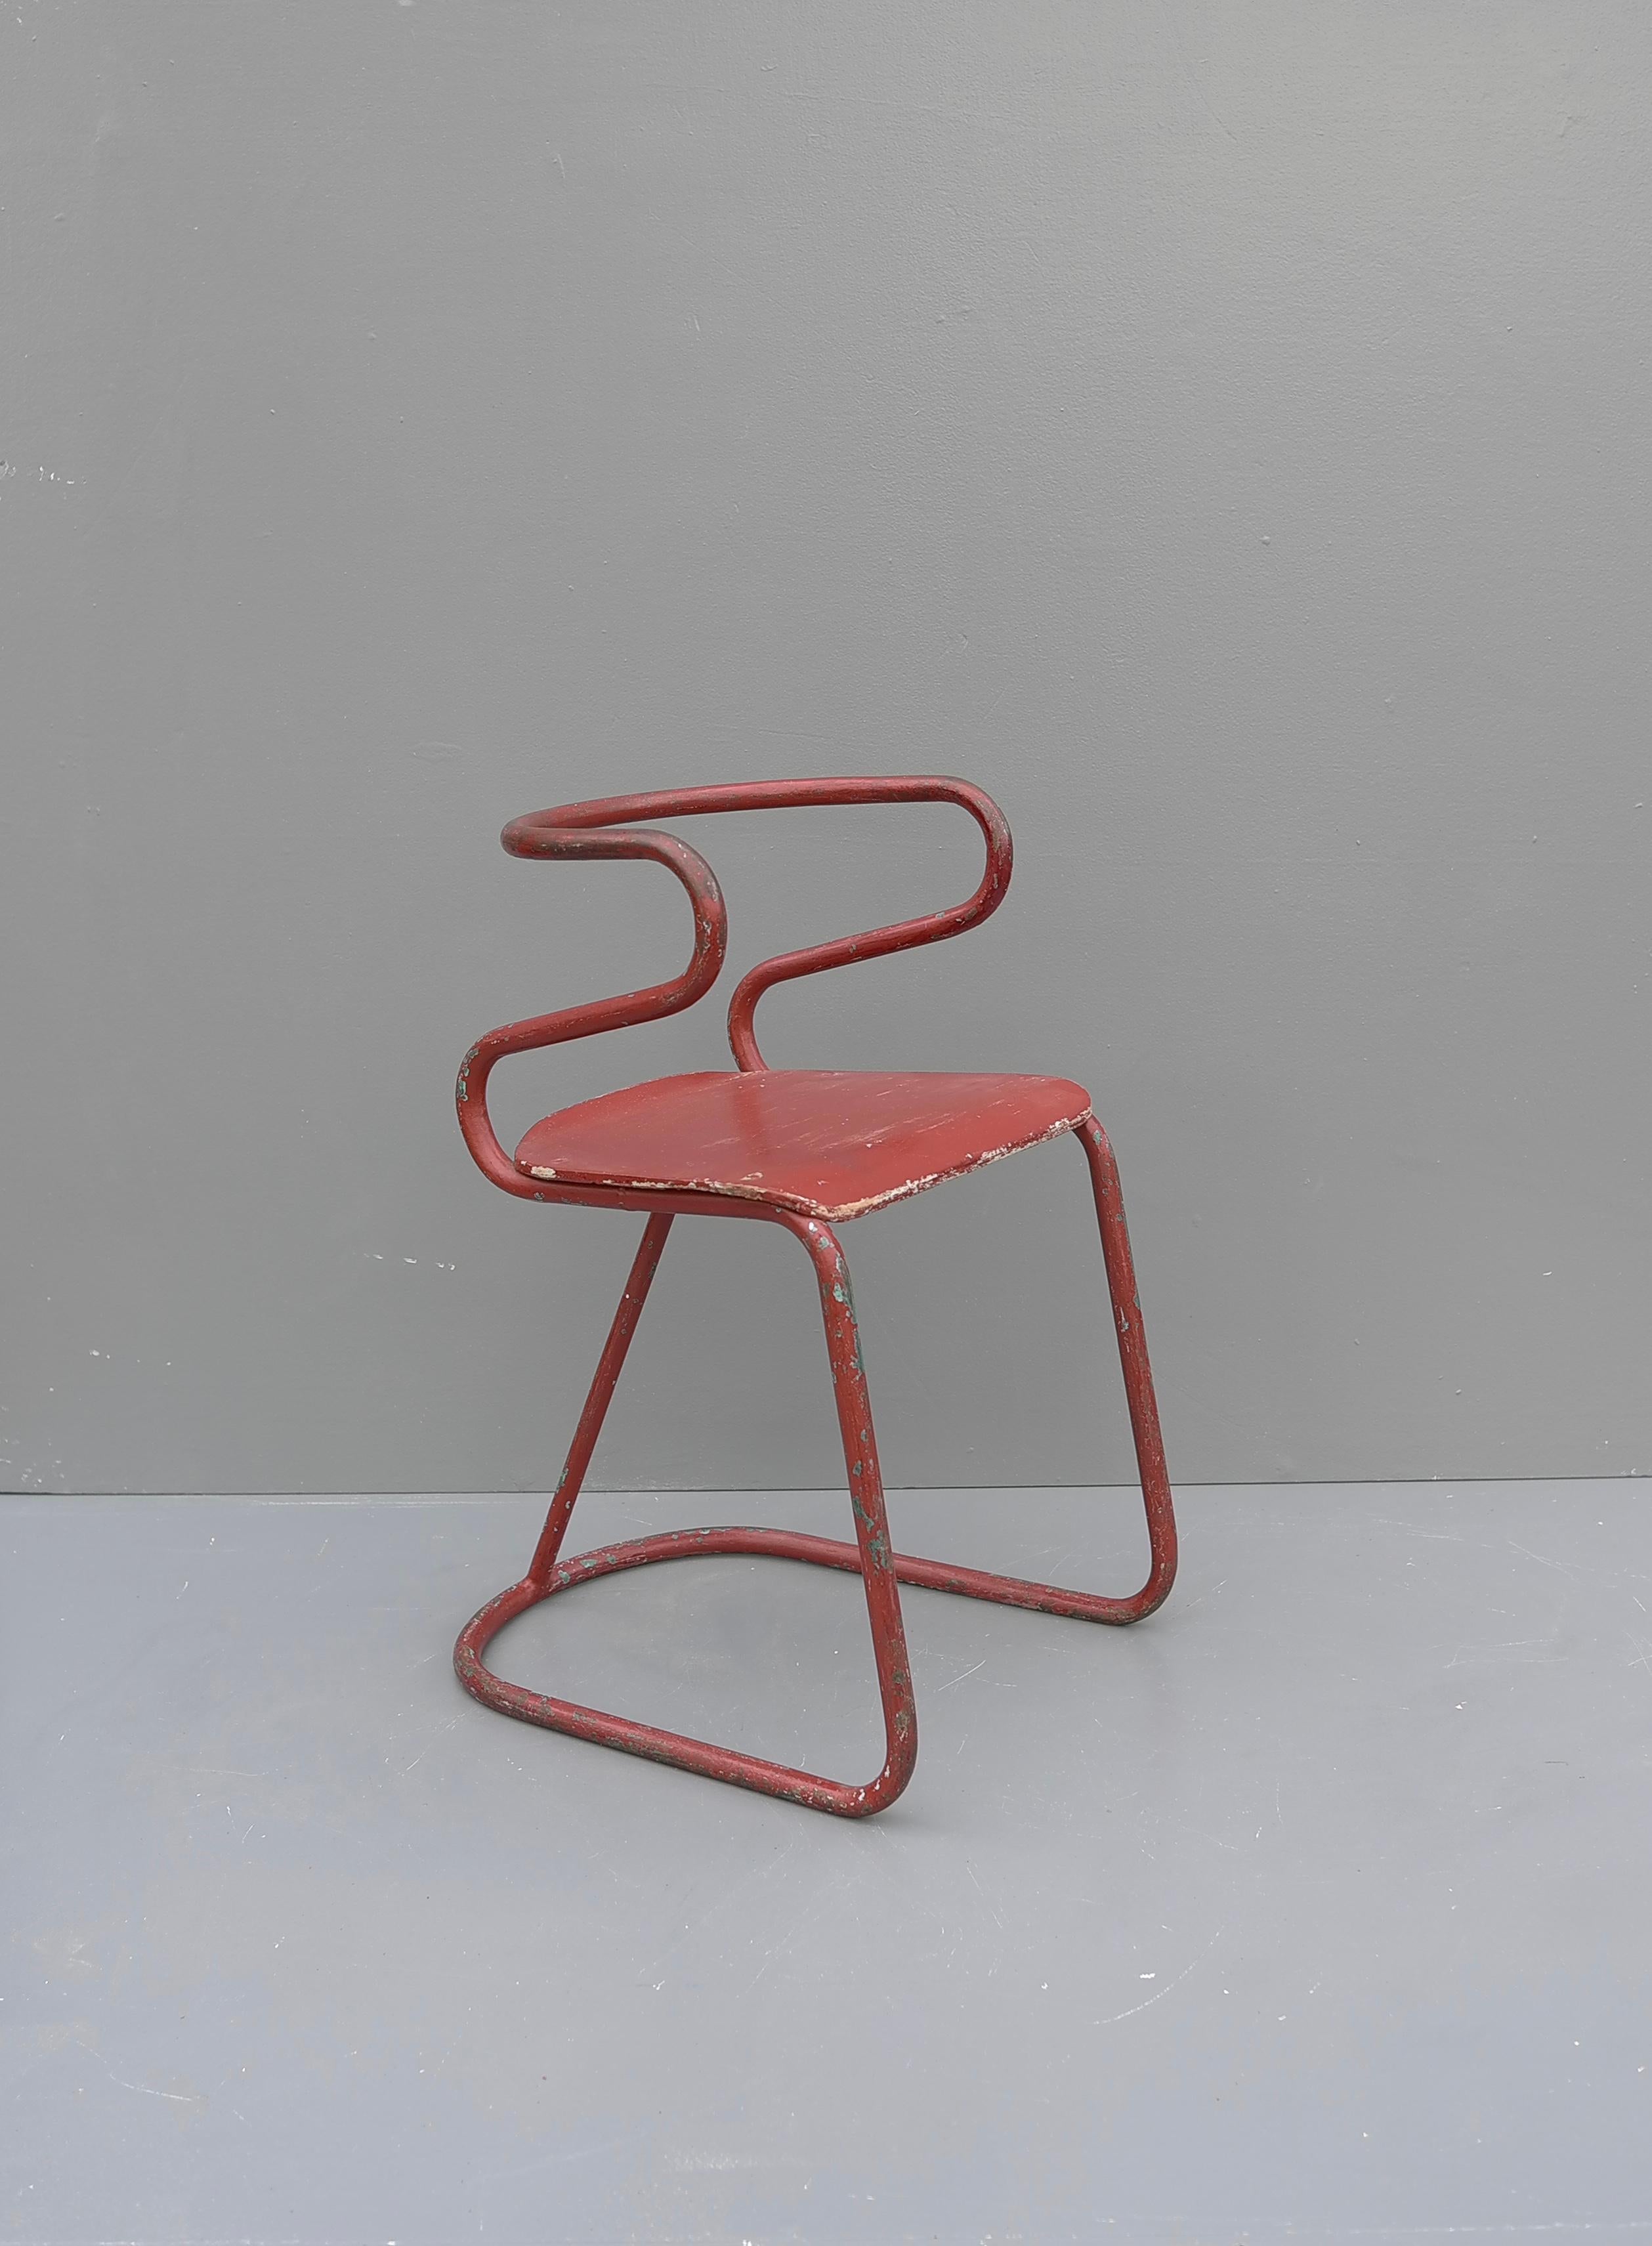 European Red Sculptural Tubular Steel and Wood Mid-Century Modern Children Chair, 1950's For Sale